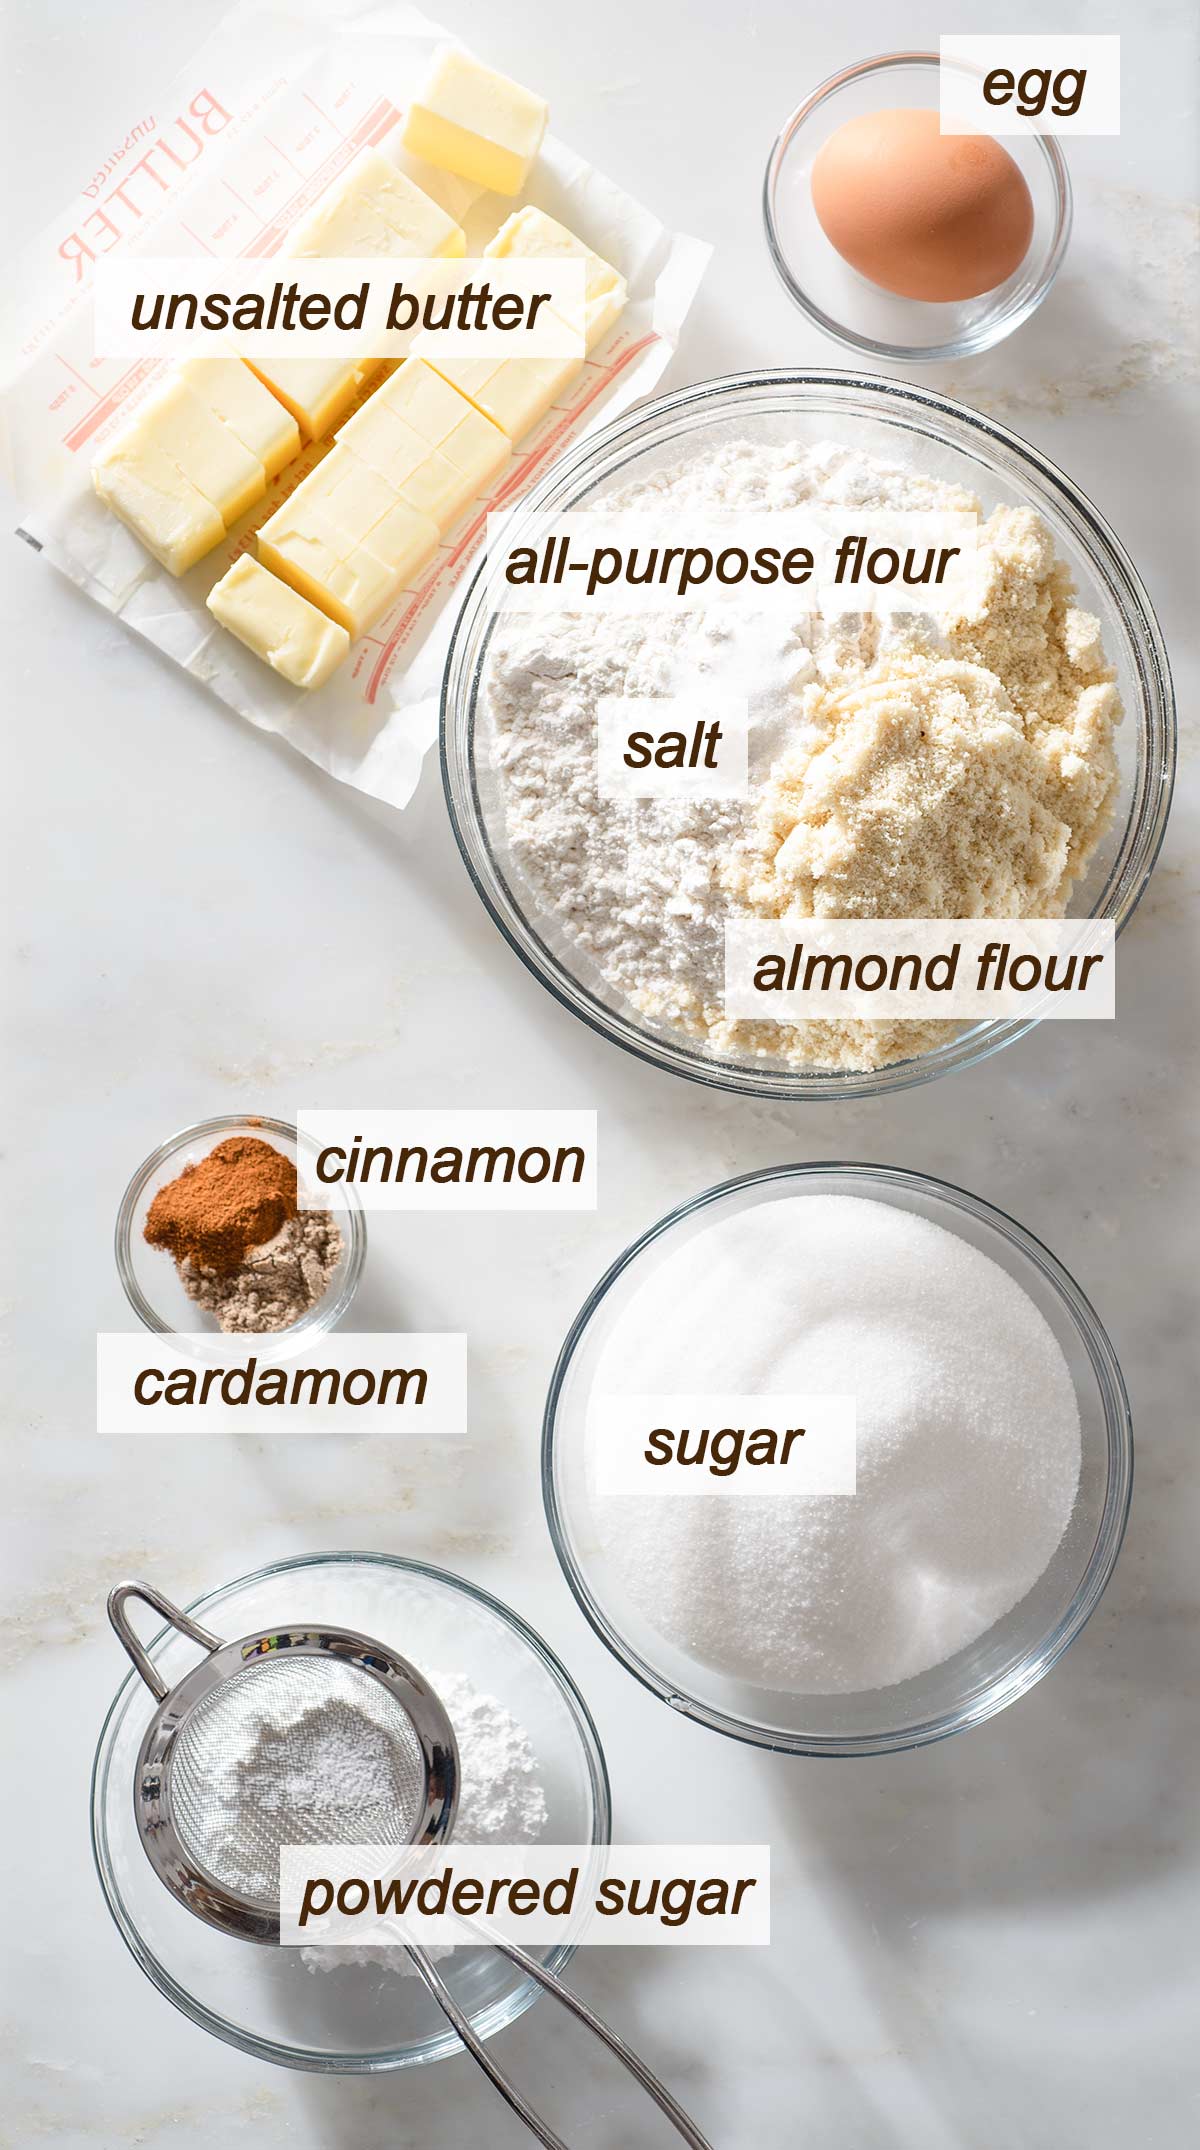 Cookie dough ingredients on a kitchen counter.